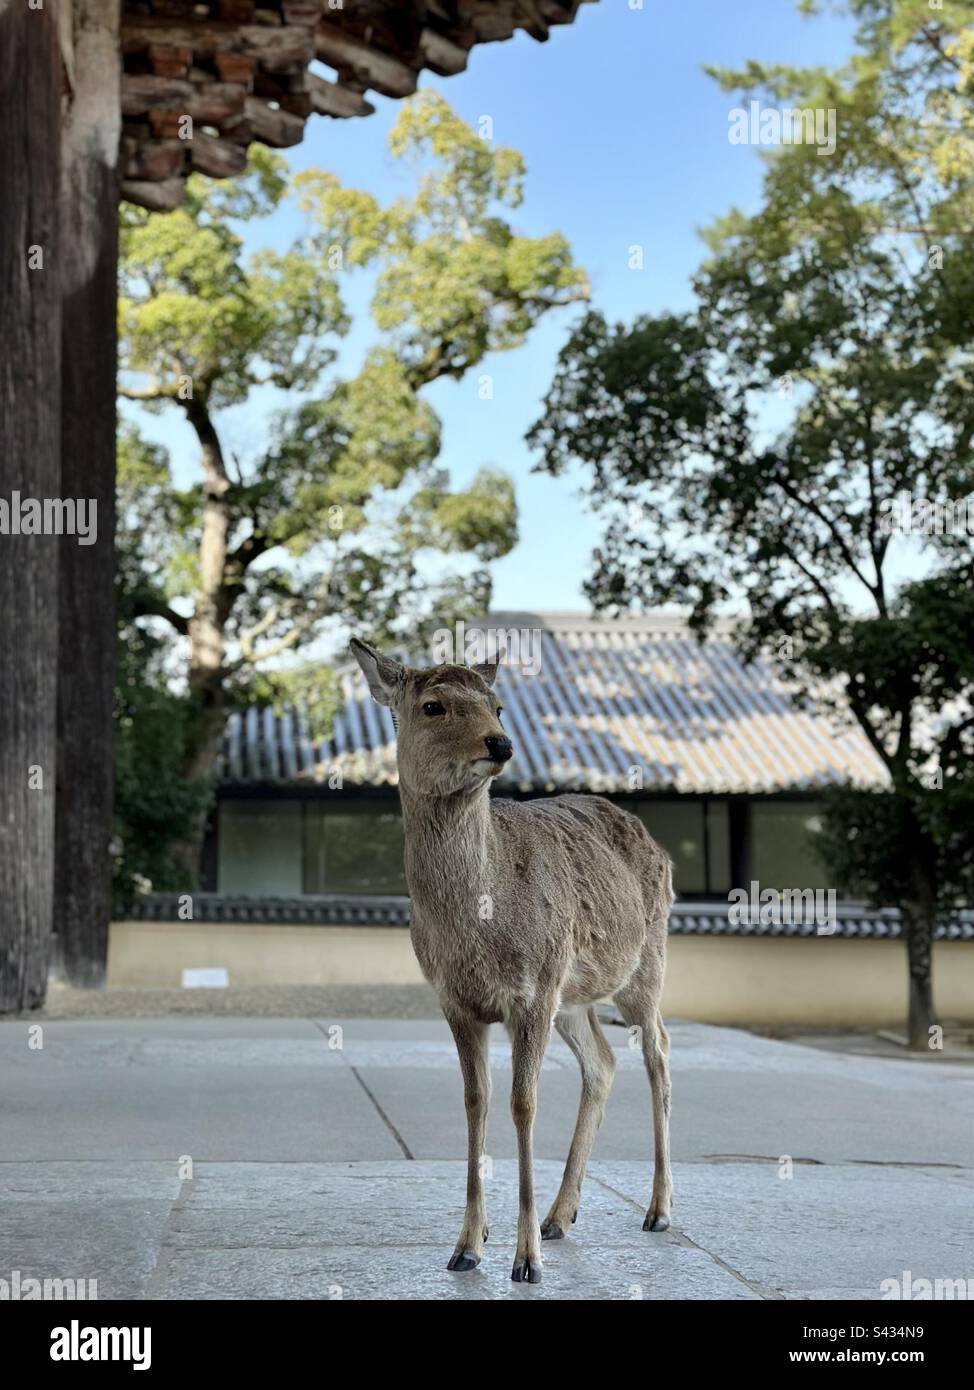 Nara deer in front of traditional Japanese architecture Stock Photo